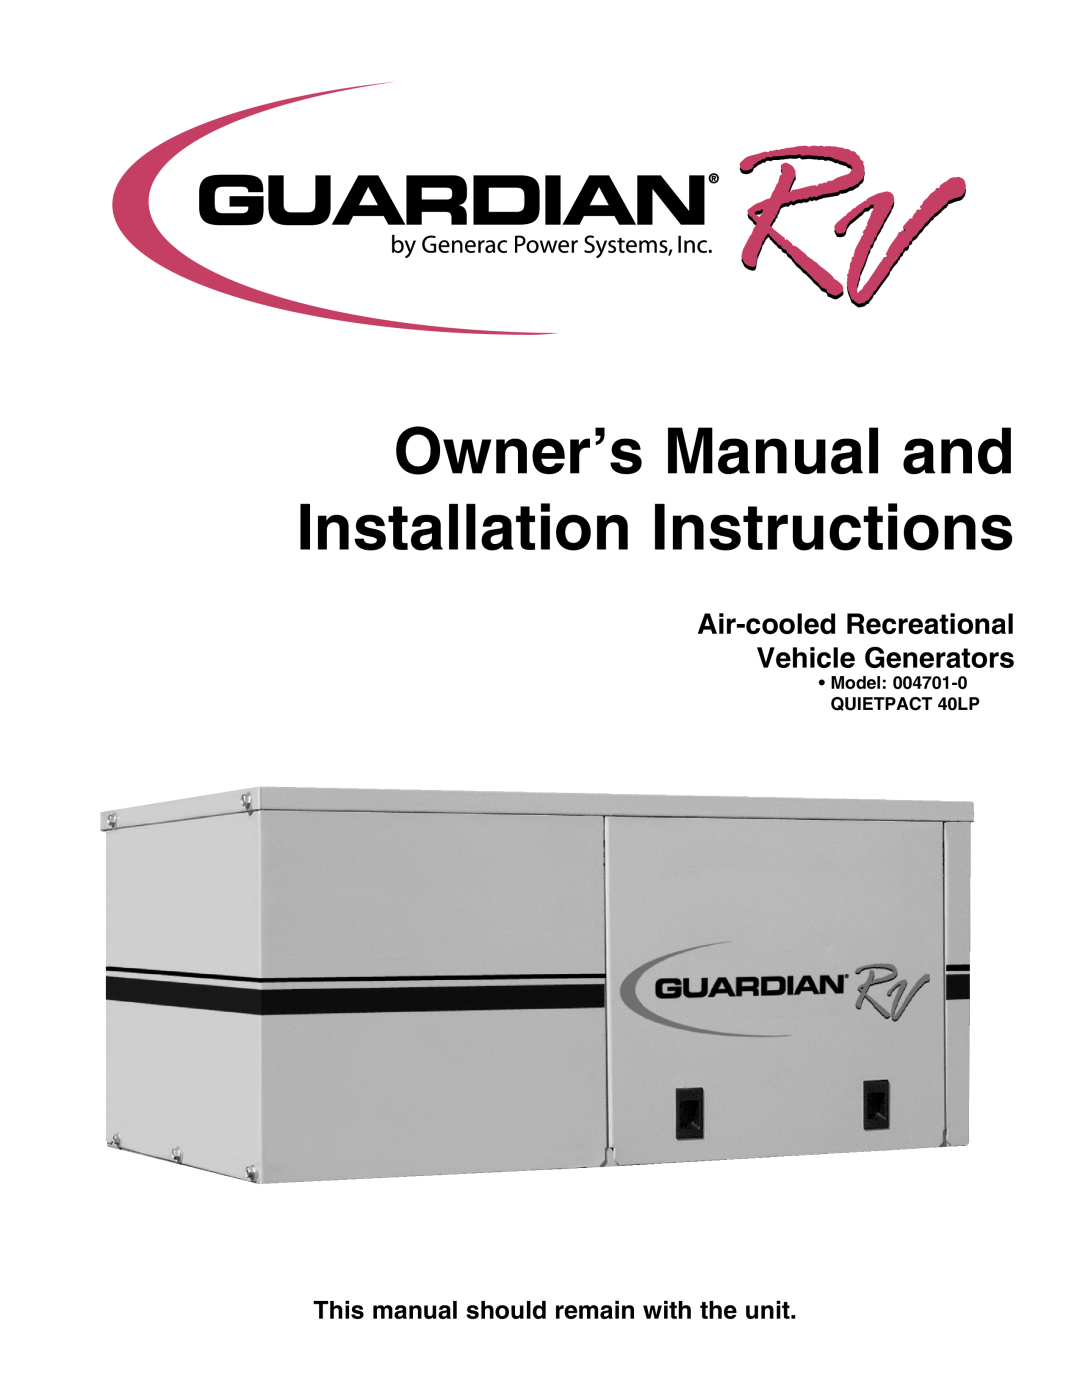 Guardian Technologies 004701-0 owner manual Owner’s Manual and Installation Instructions, • Model: QUIETPACT 40LP 